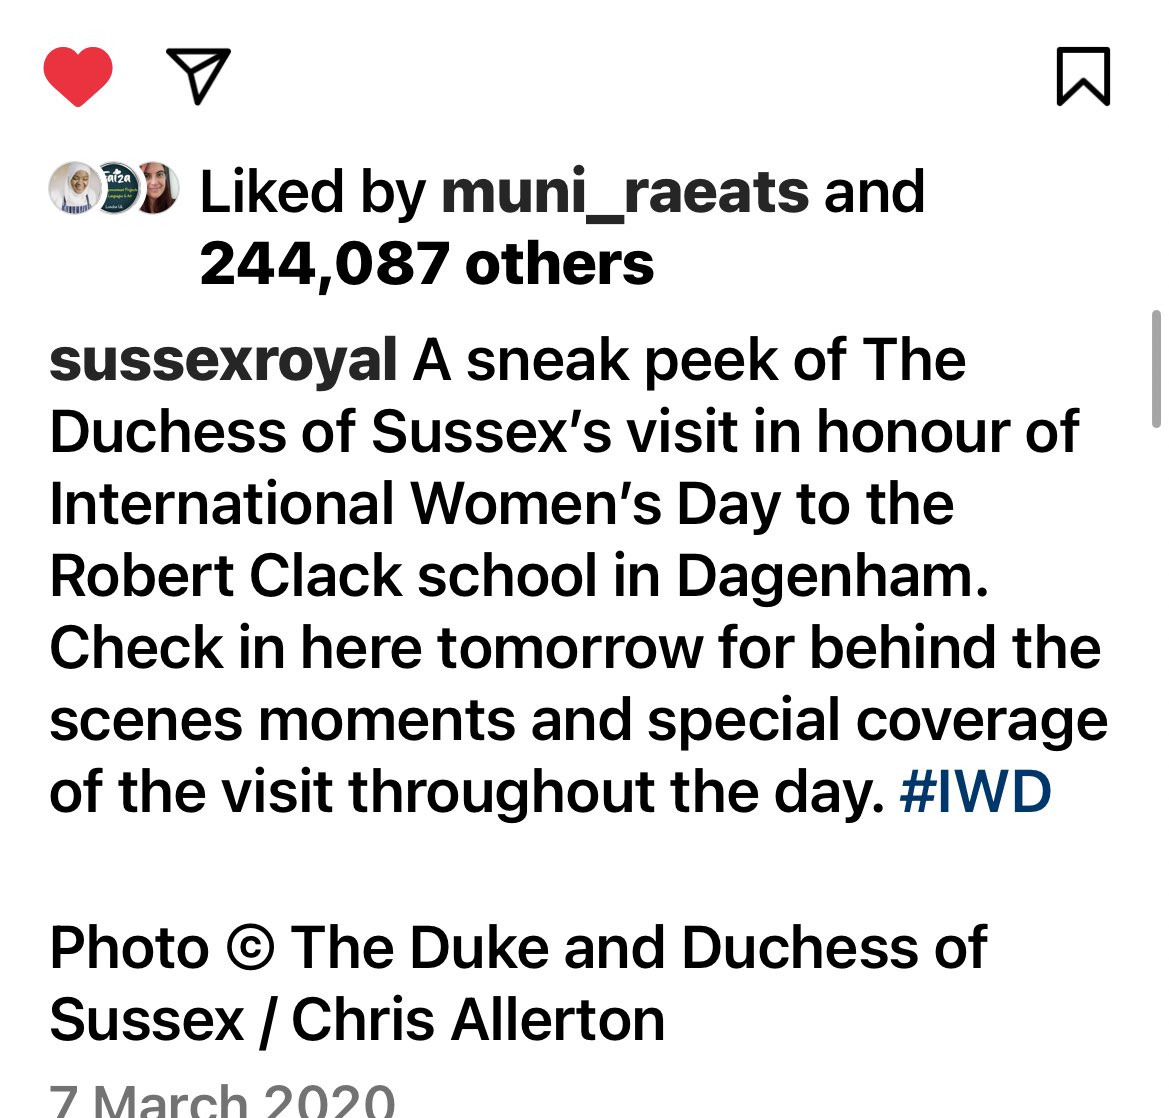 #ThrowBackSussex #MeghanMarkle #iwd2020 “she really is beautiful, innit”  @AkerOkoye24  @RClackOfficial 🥳😂🥰👸🏻🏫👦🏽👩🏽👩🏼👦🏼